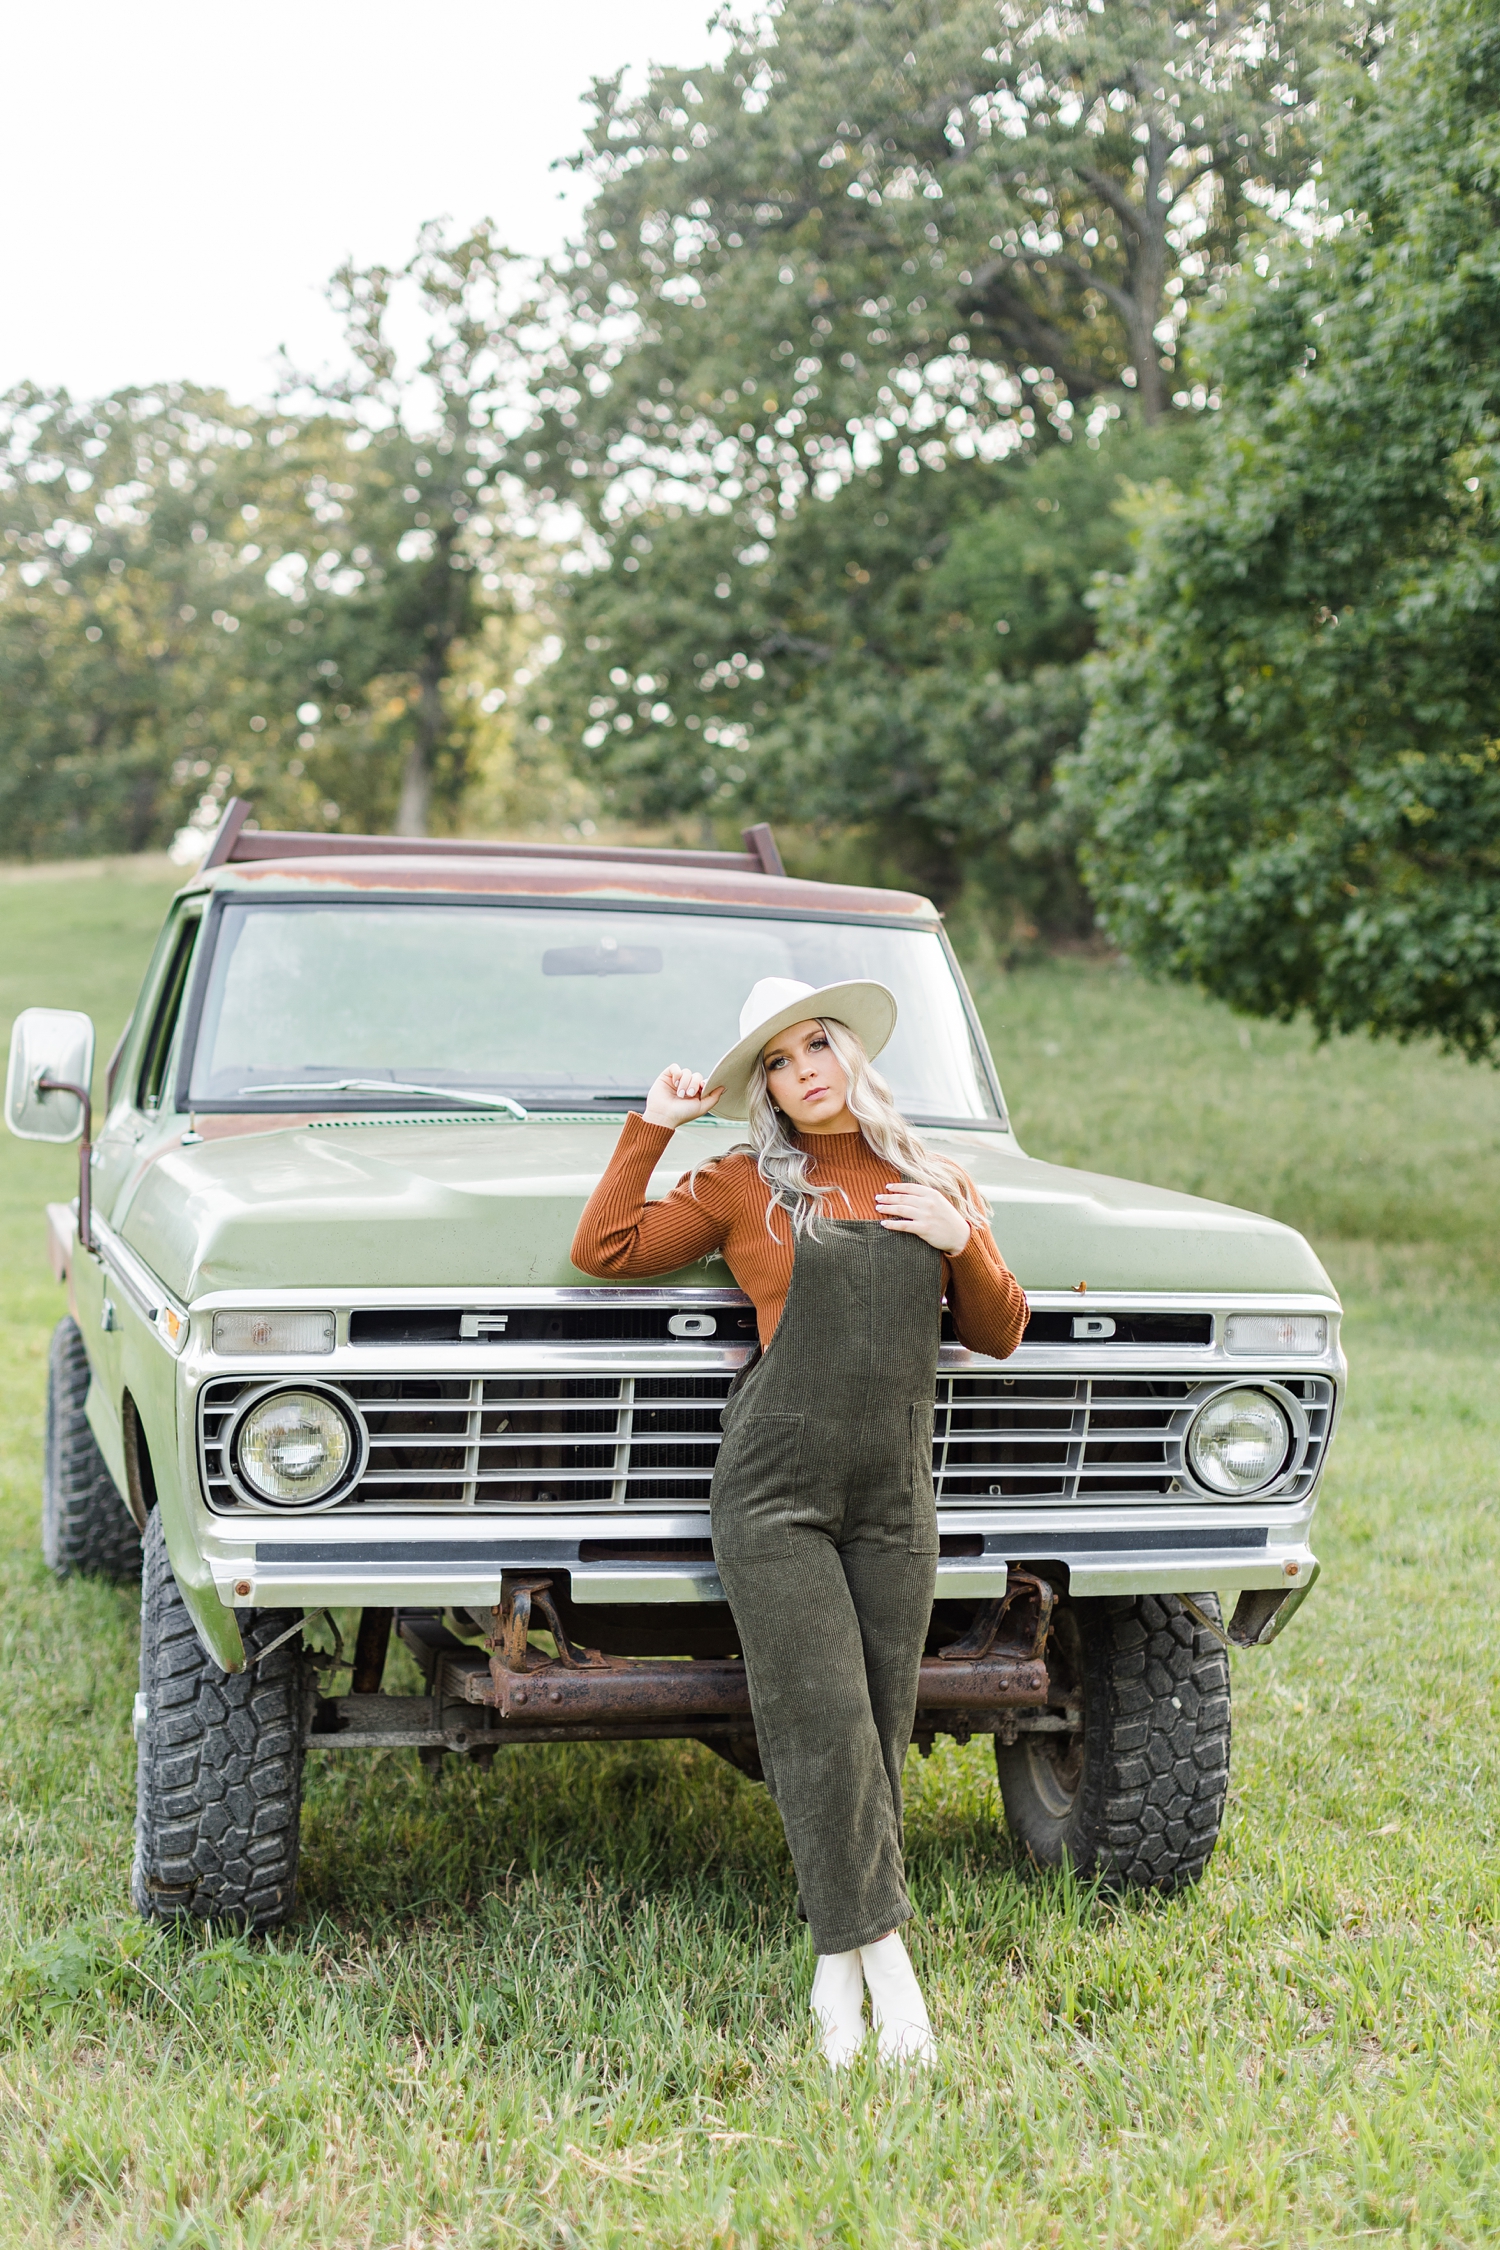 Shelby leans against the front end of a green 72 Ford truck in the middle of a grassy pasture | CB Studio